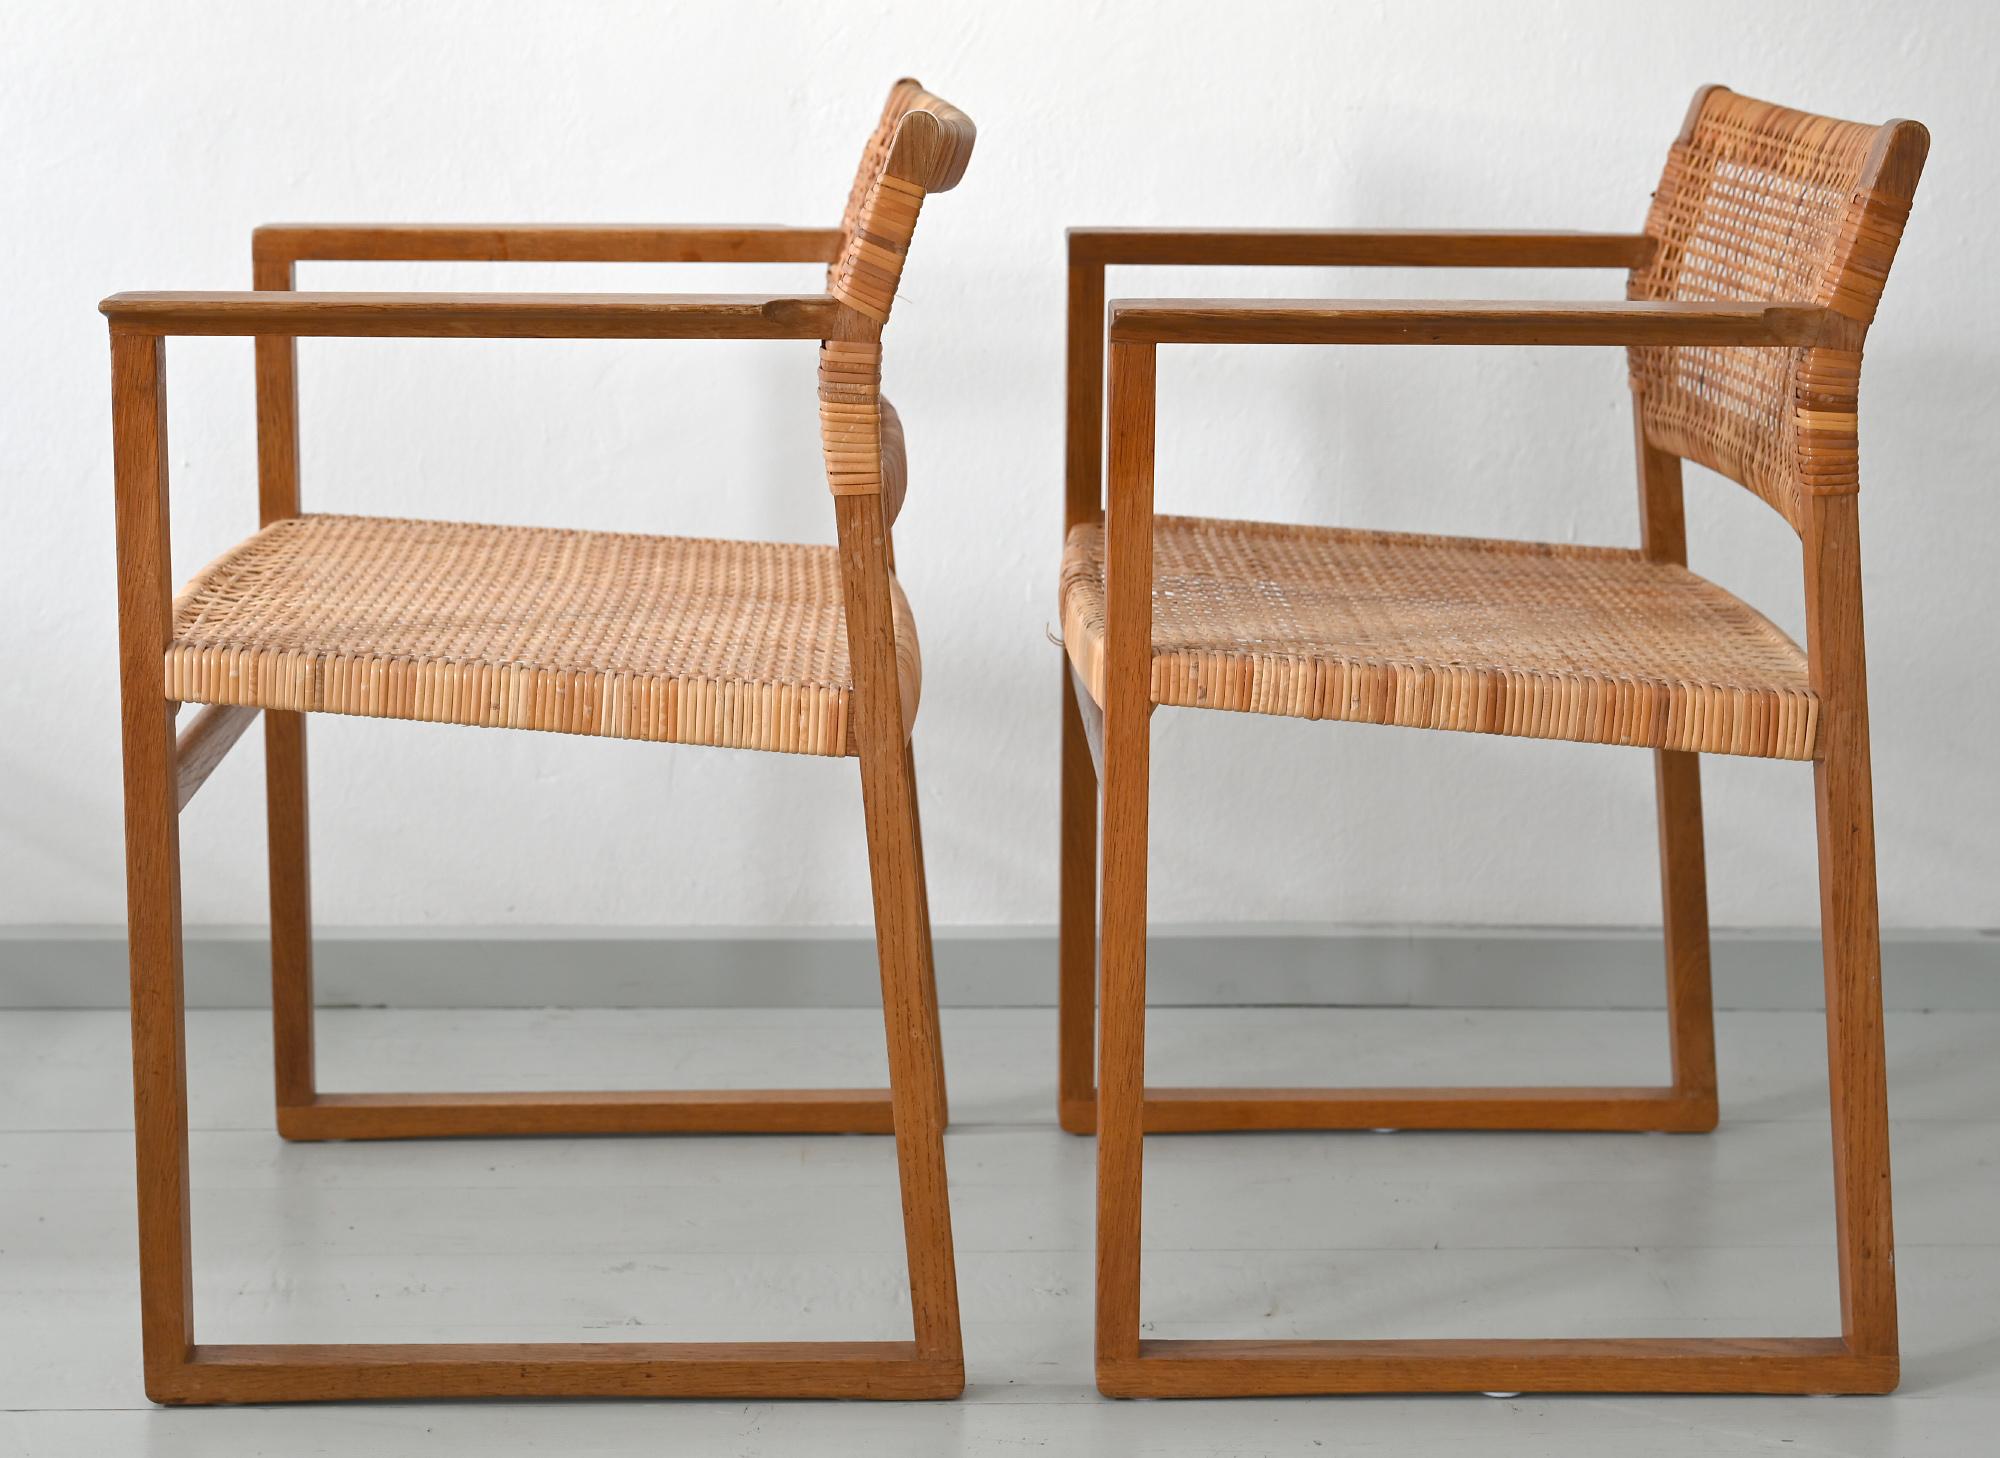 Pair of armchairs Borge Mogenson Modell BM-62
by Fredericia Stolefabric in Denmark midcentury.
Børge Mogensen brings us back to nature with the choice of cane wicker or linen webbing coupled with a solid wood frame. In a slender design involving